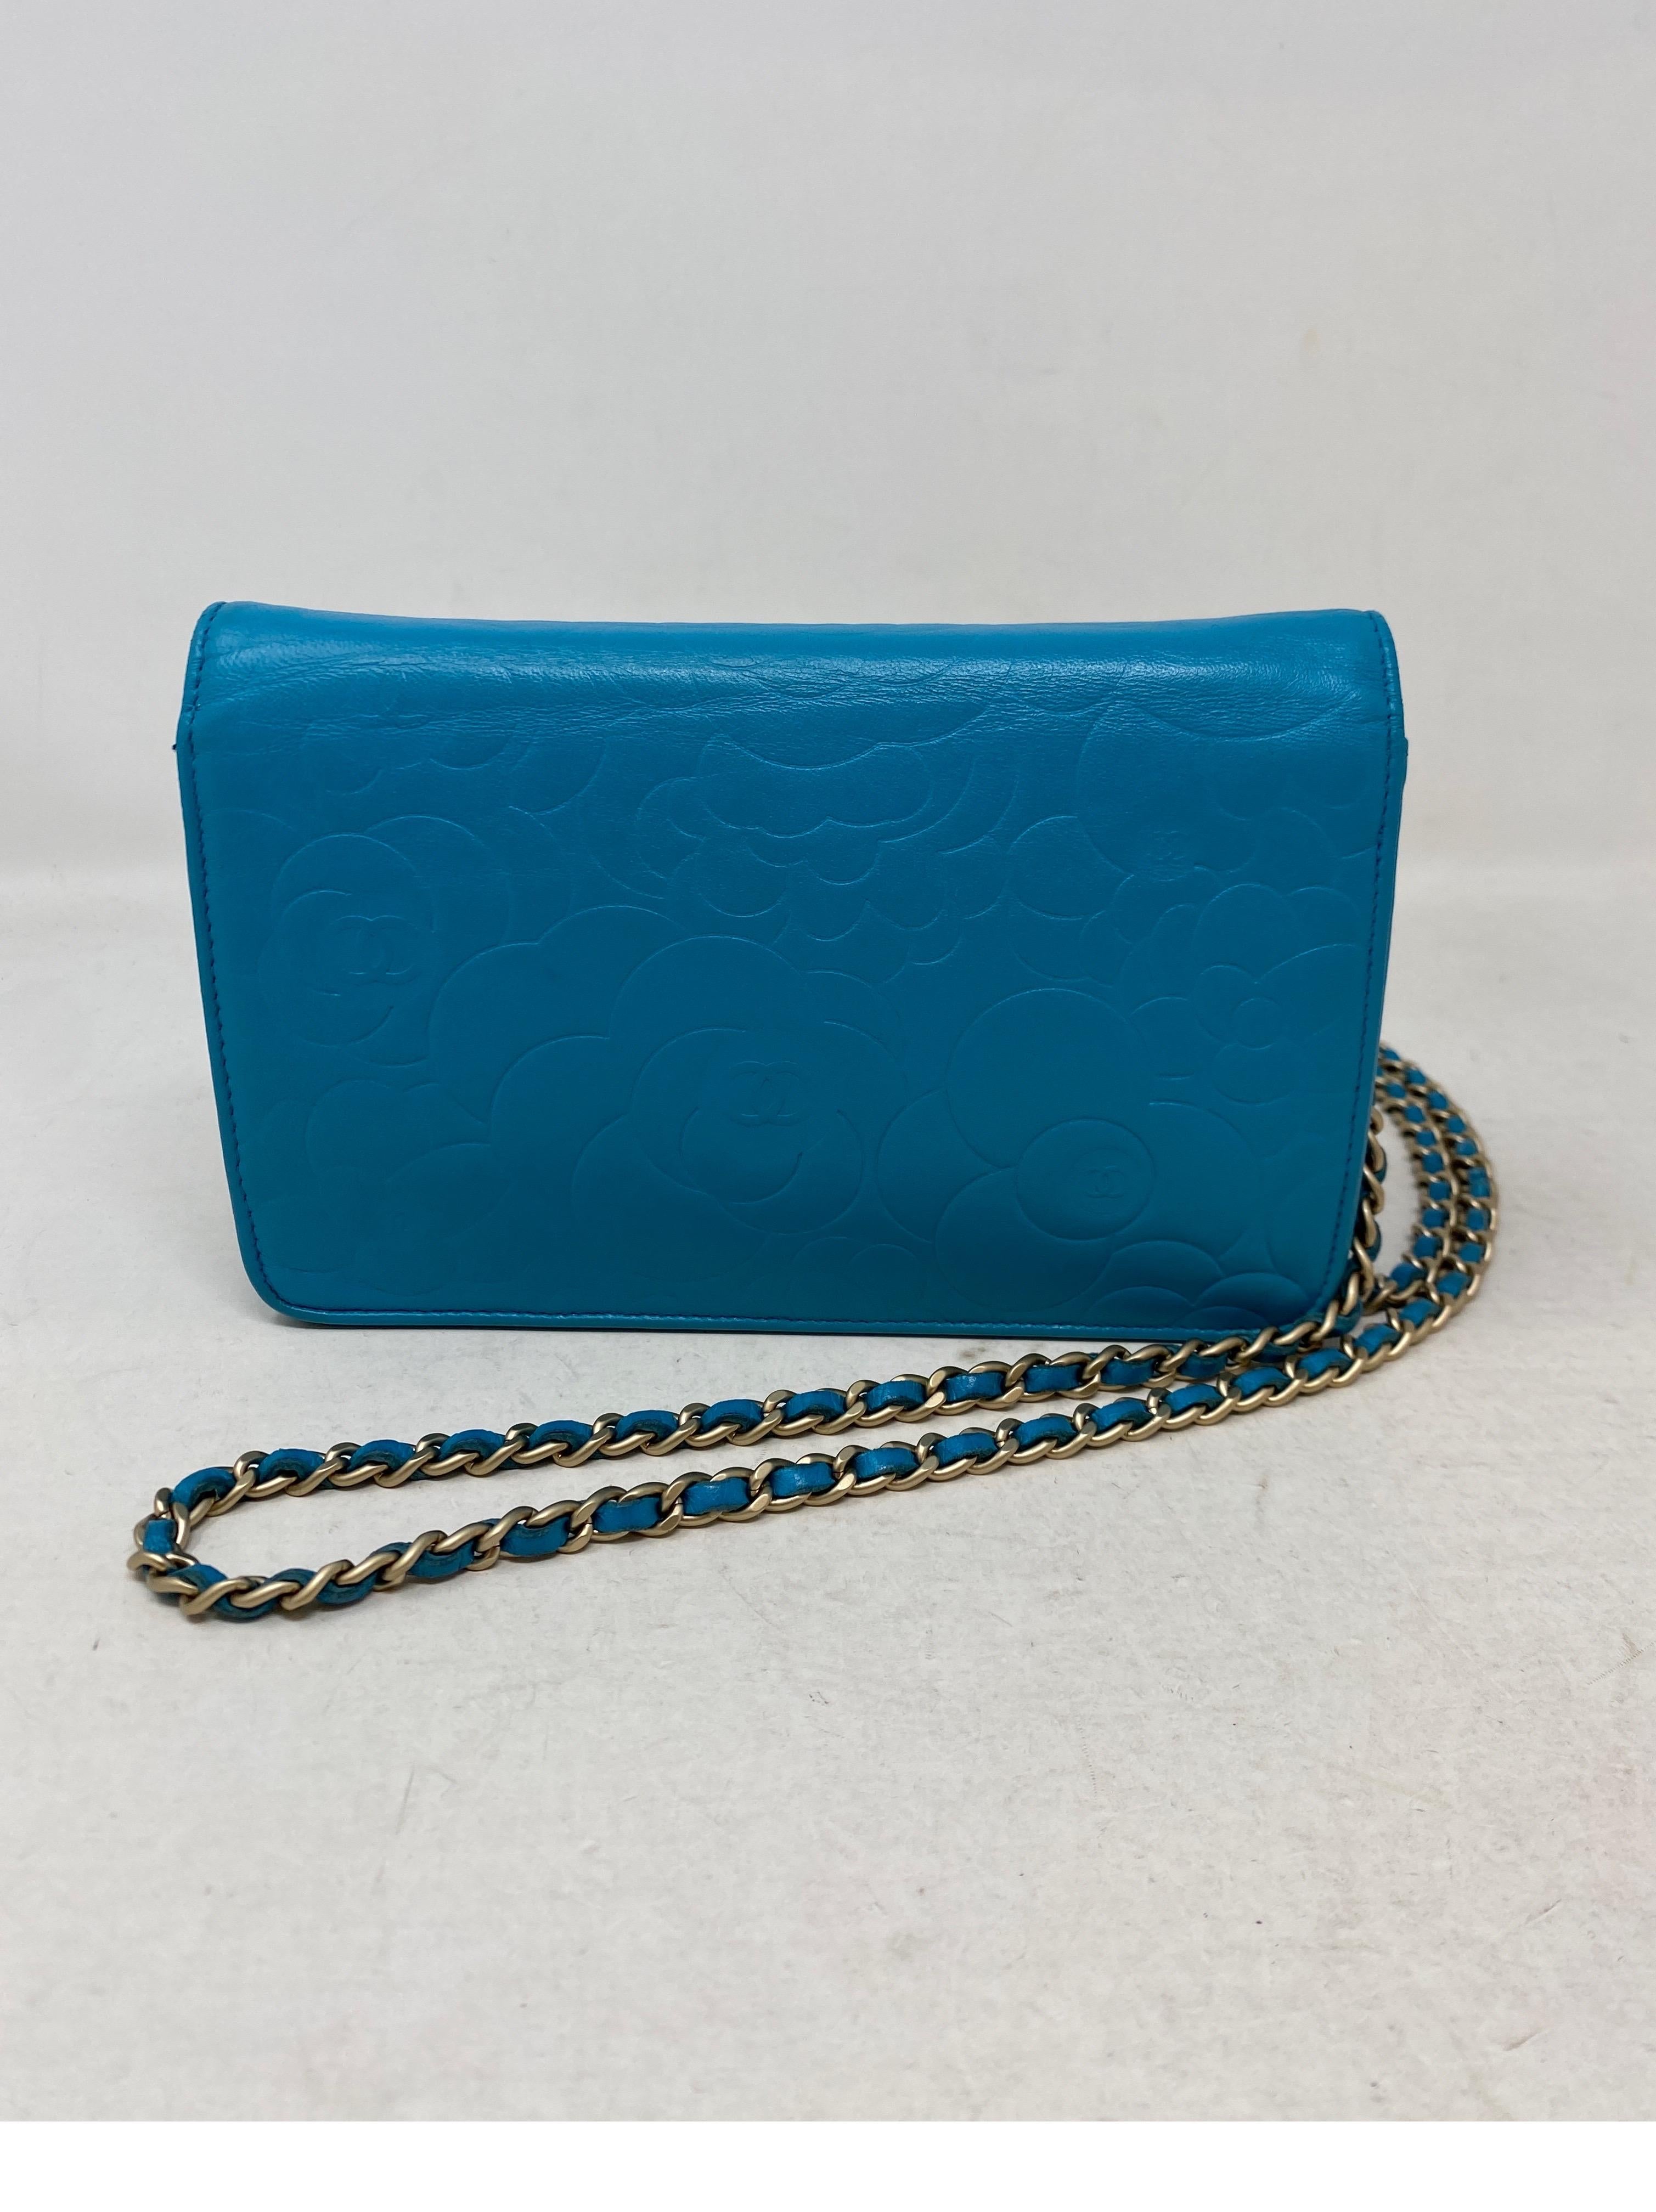 Chanel Teal Wallet On A Chain Bag  8